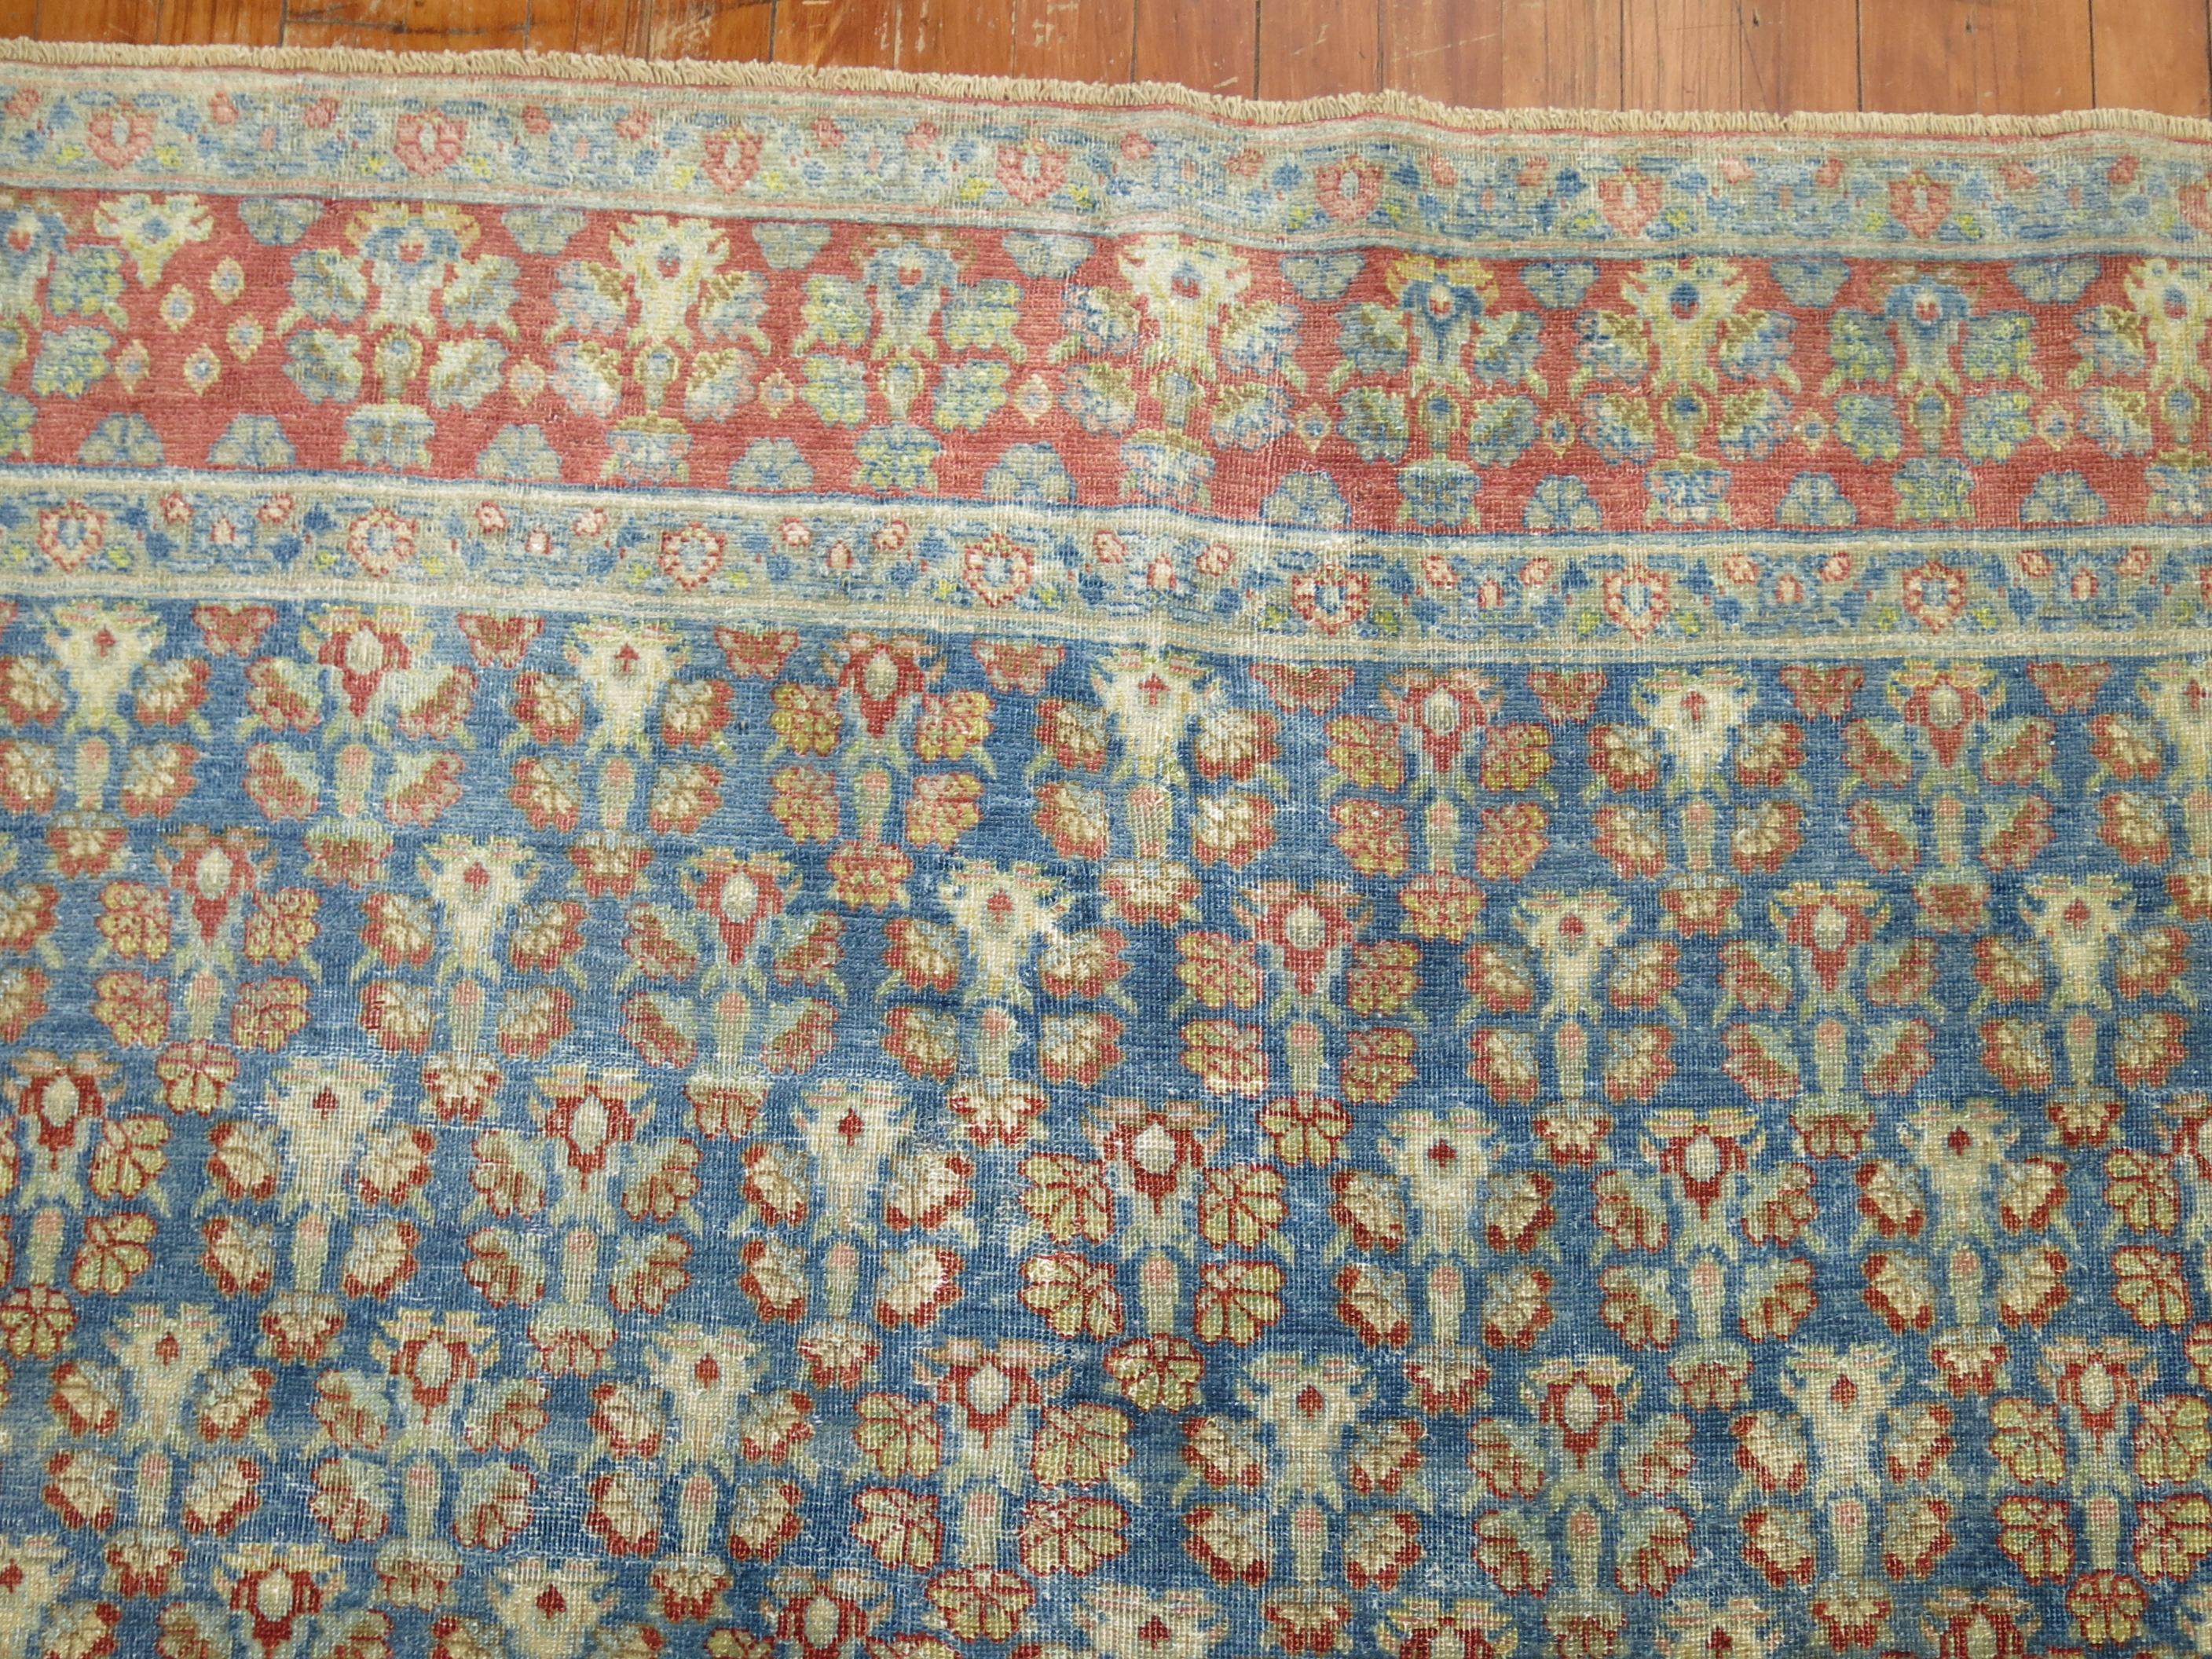 Denim Blue Antique Persian Joshegan Rug, Early 20th Century In Fair Condition For Sale In New York, NY